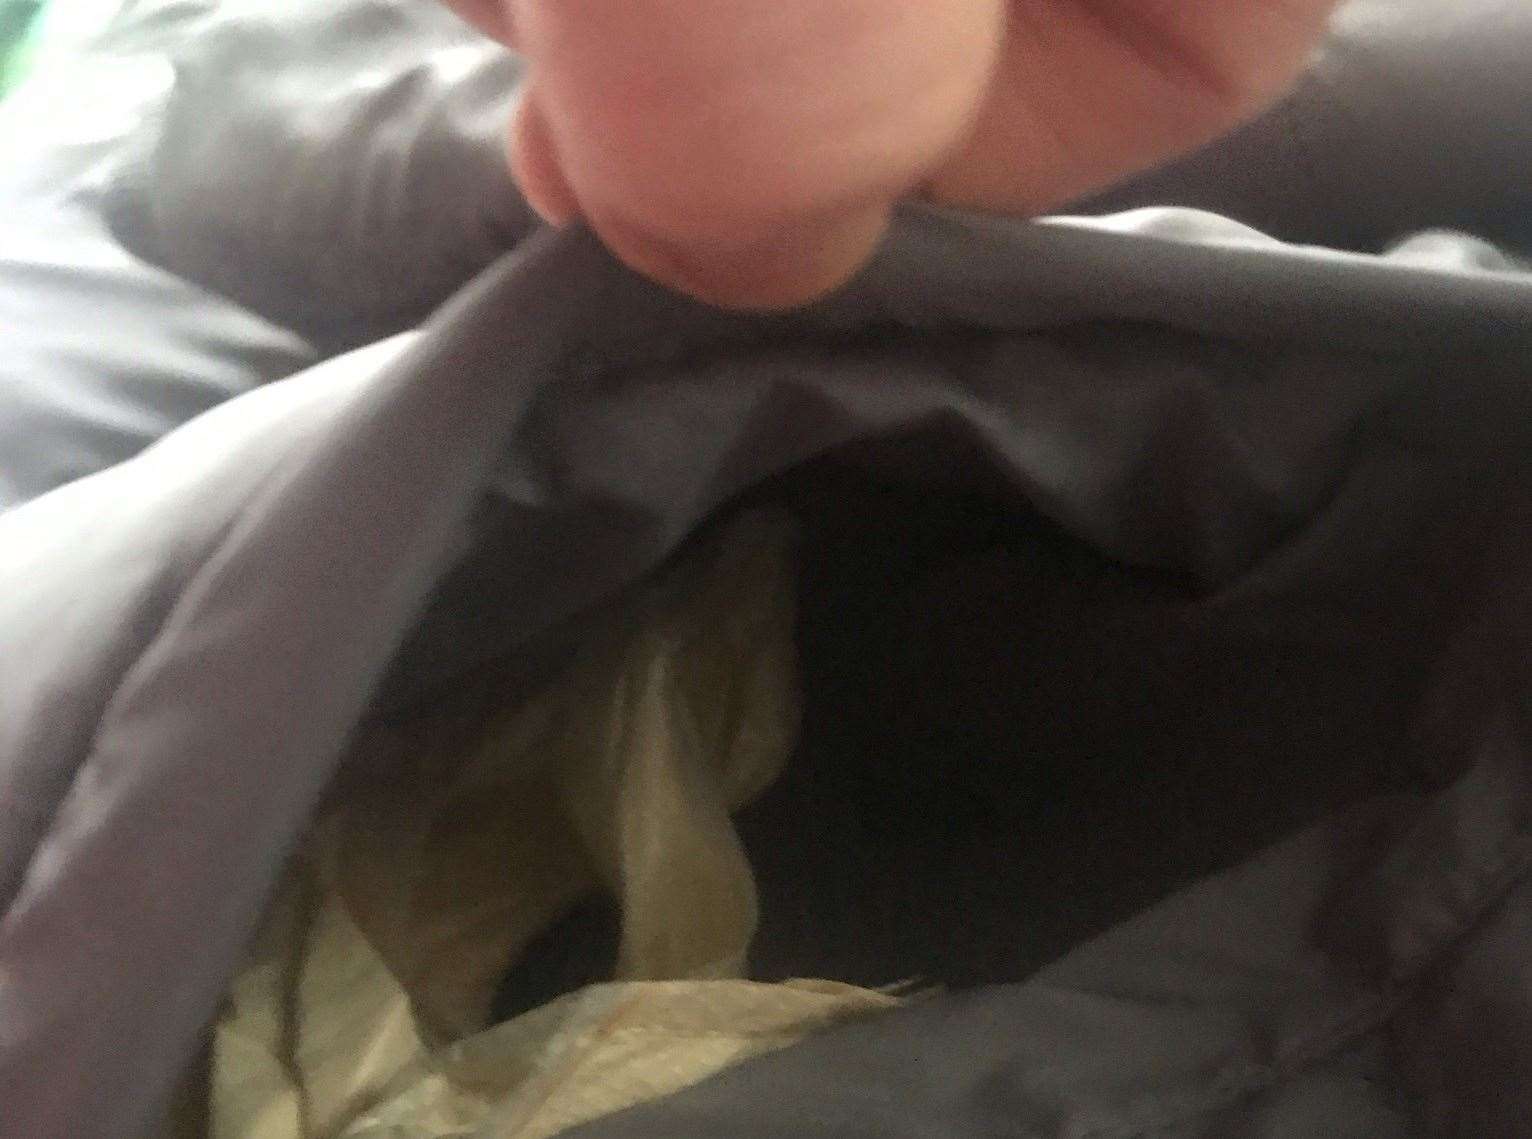 Mum Anna Busby, from Gillingham, finds dirty tissues and nappy sacks in pockets of new coat from JD Sports bought online. Picture: Anna Busby